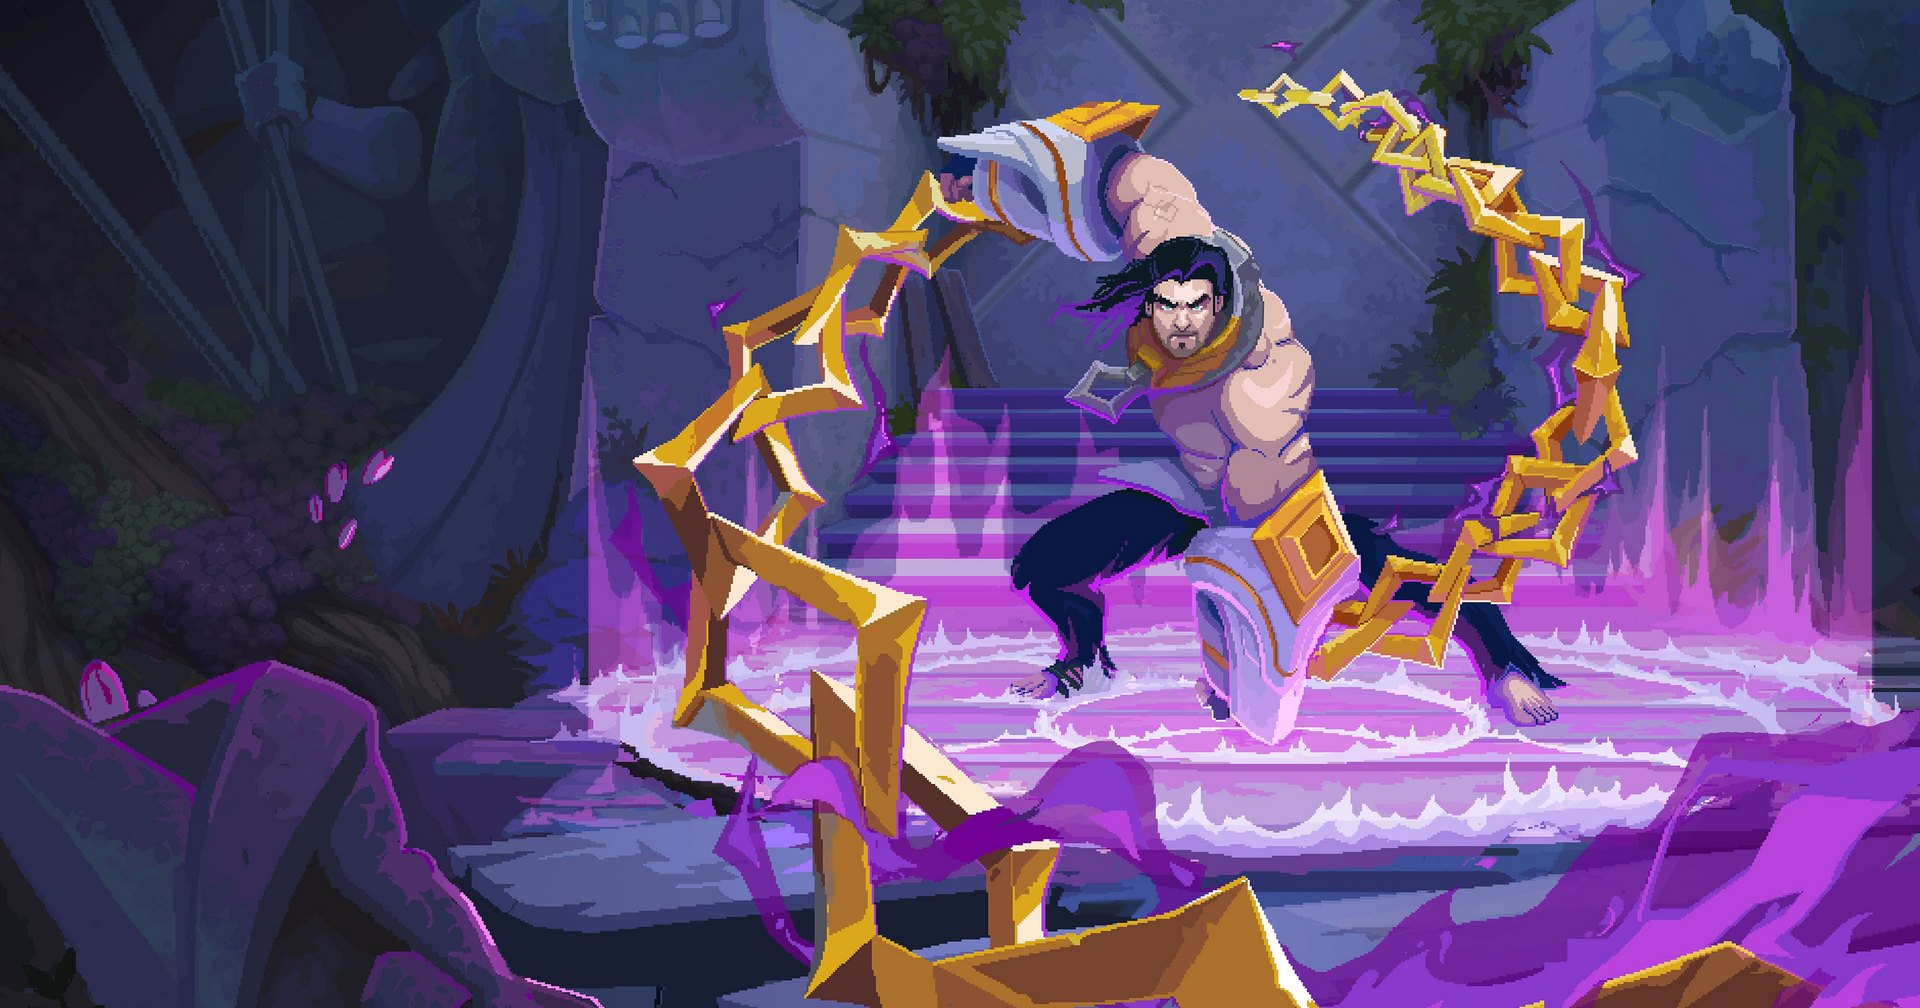 The Mageseeker is the new spin-off in the League of Legends universe. Here we see Sylas the Unshackled with his chains.